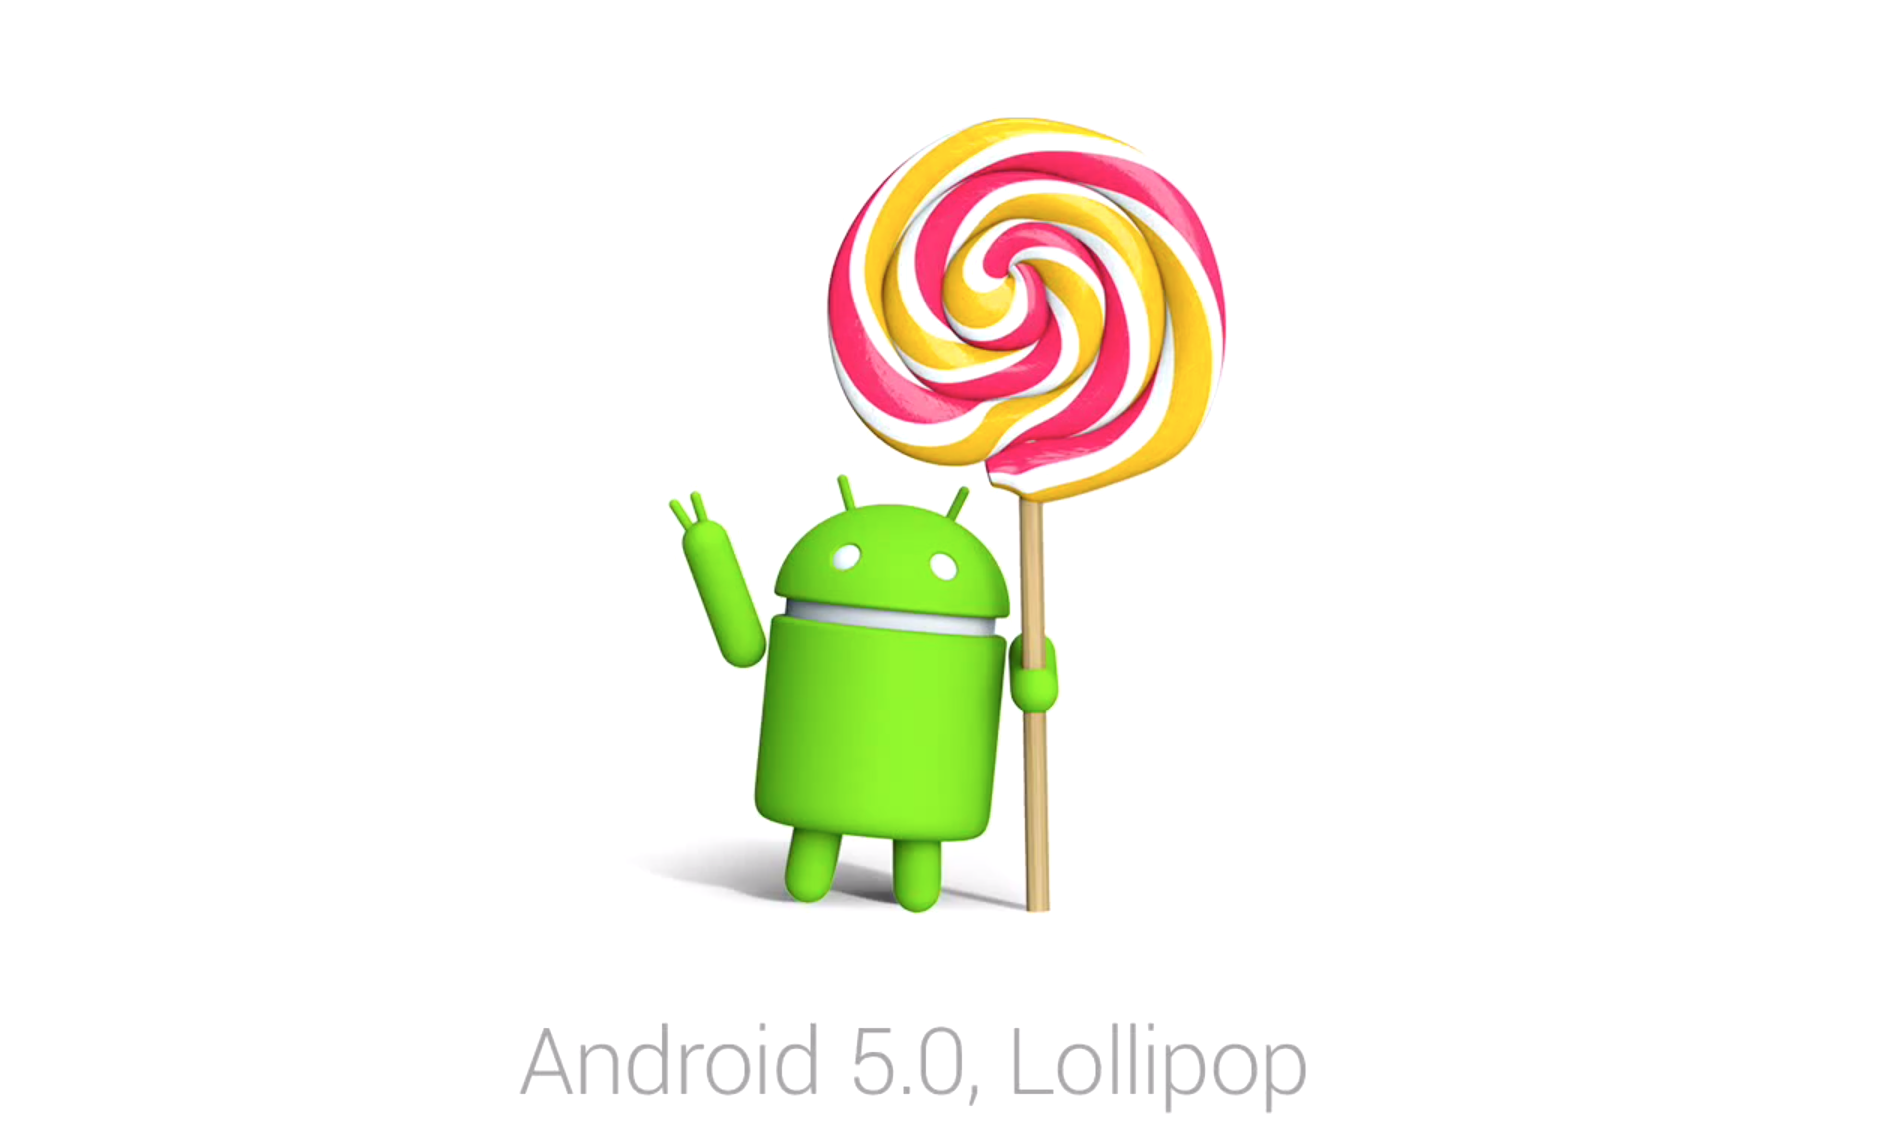 HTC One M8, M7 and Samsung Galaxy S4 to Get Android 5.0 lollipop Soon?